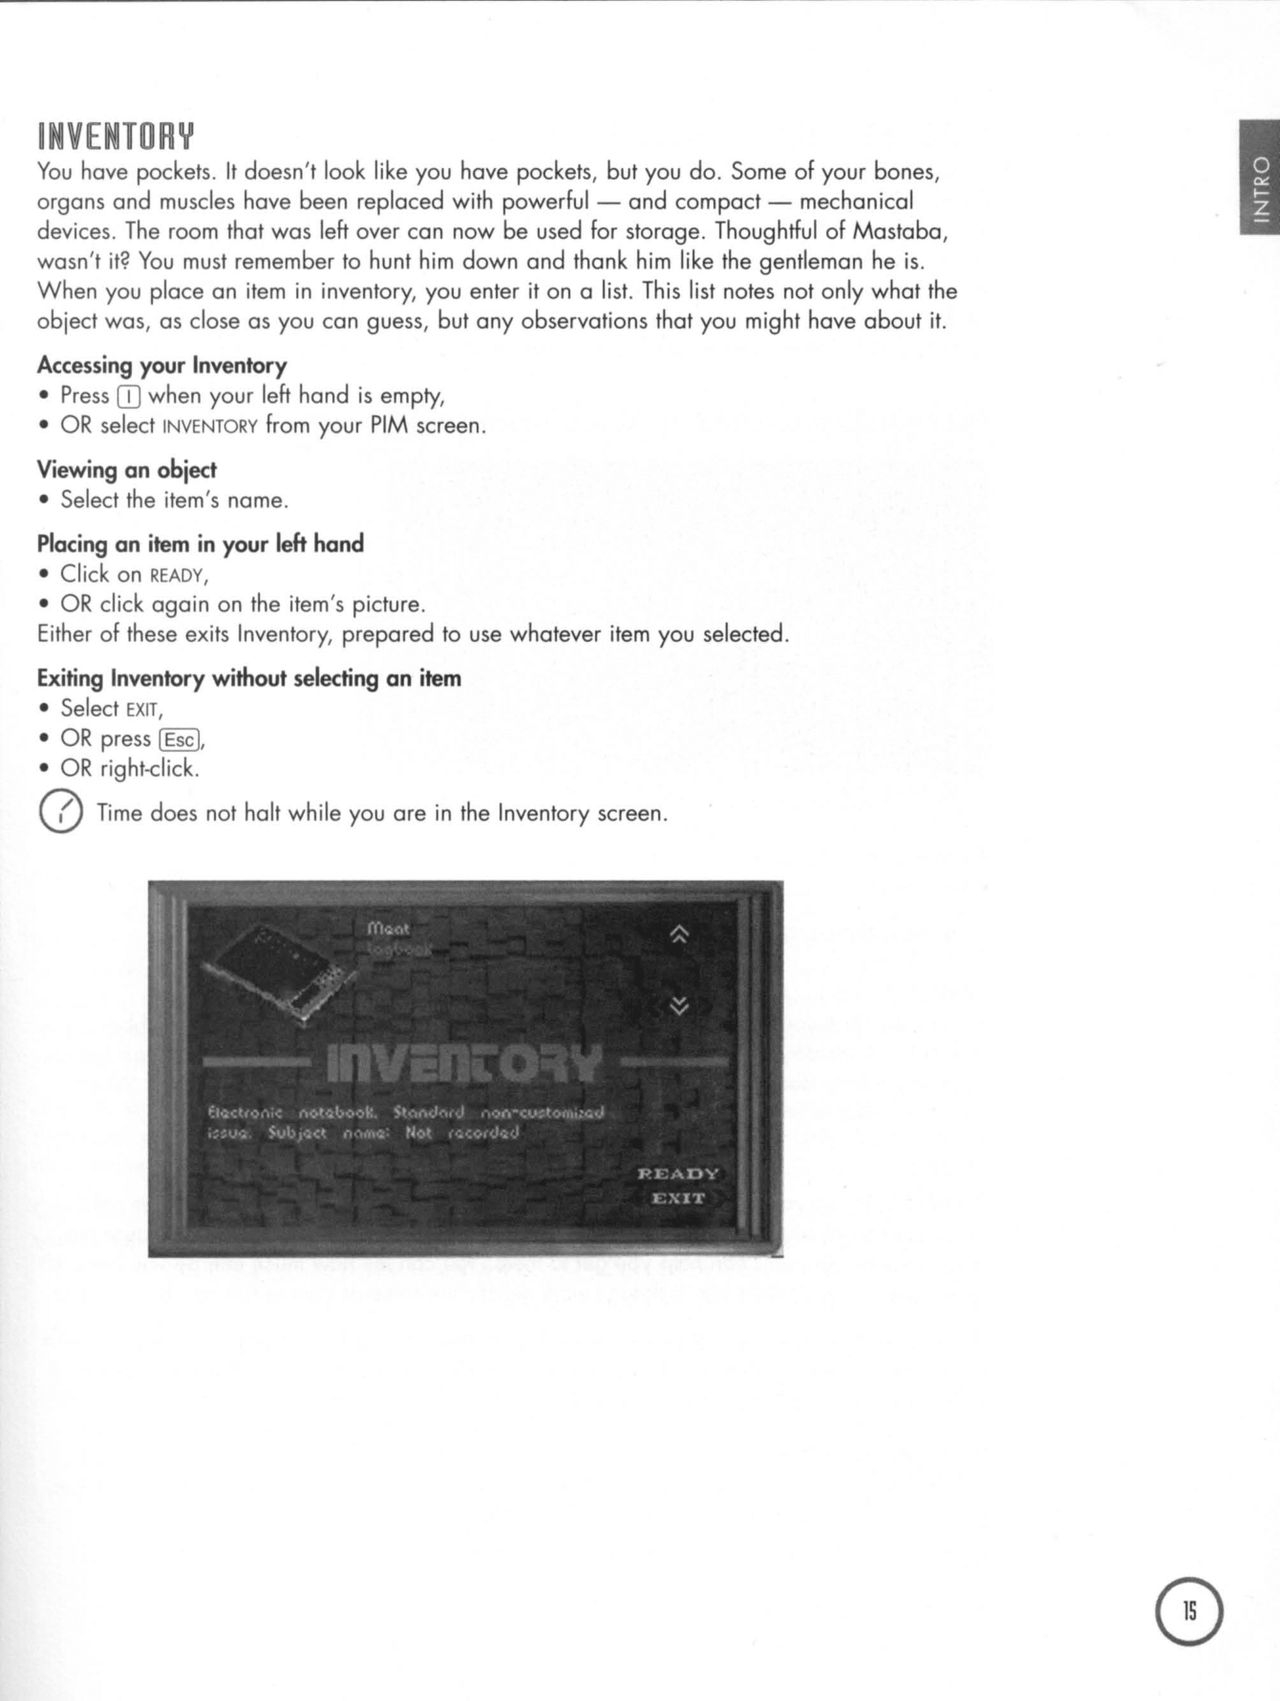 BioForge (PC (DOS/Windows)) Strategy Guide 15